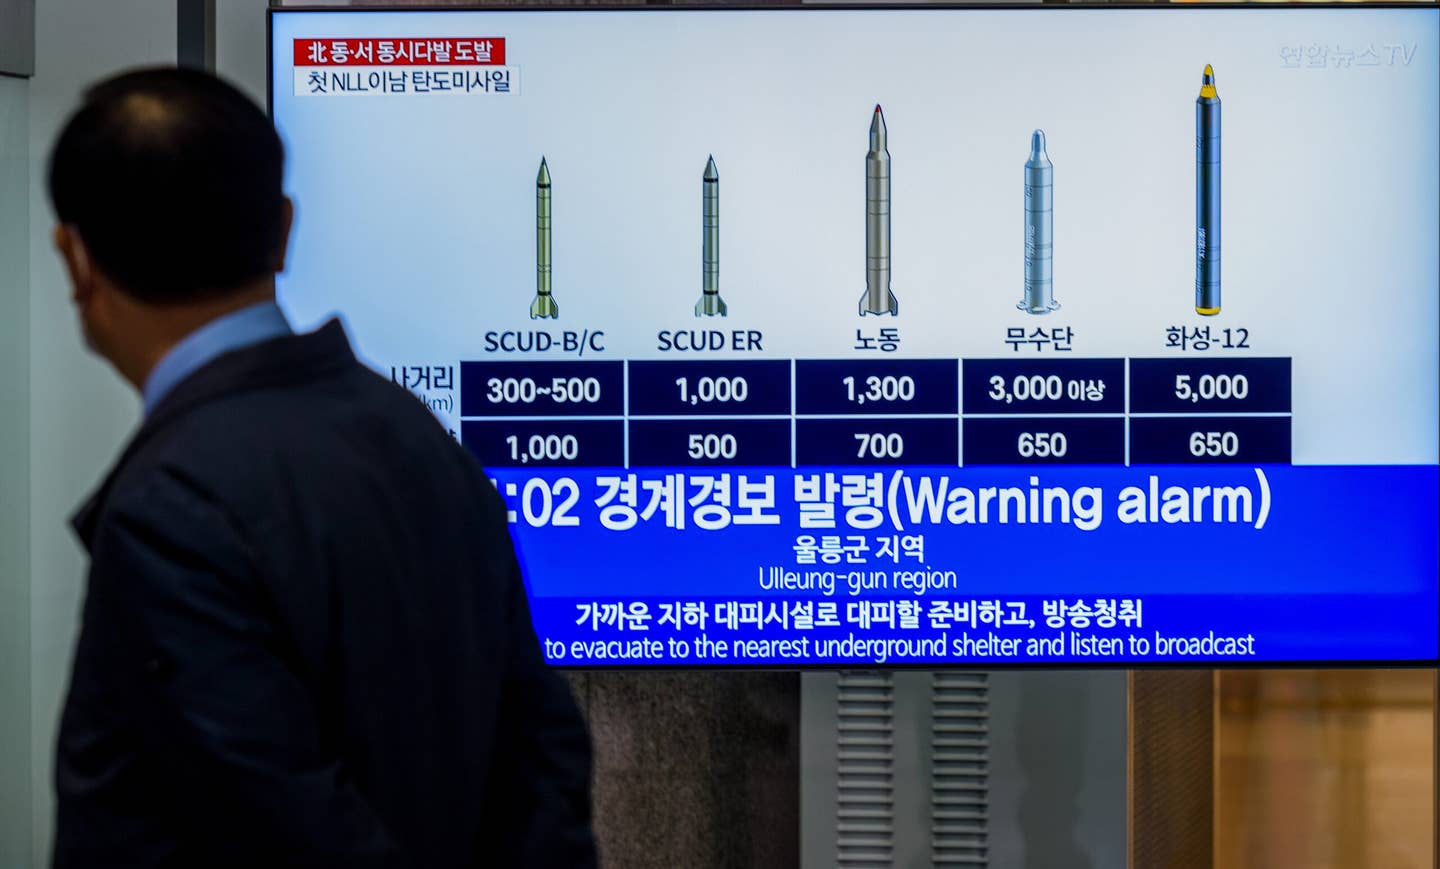 A TV screen displayed at a railway station in Seoul shows a news program flashing a warning alarm after a North Korean missile launch toward Ulleungdo island. North Korea fired one short-range ballistic missile (SRBM) toward the South Korean island on November 2, which prompted the South Korean government to immediately issue an air raid alert to tell residents to take shelter. <em>Photo by KIM Jae-Hwan/SOPA Images/LightRocket via Getty Images</em>